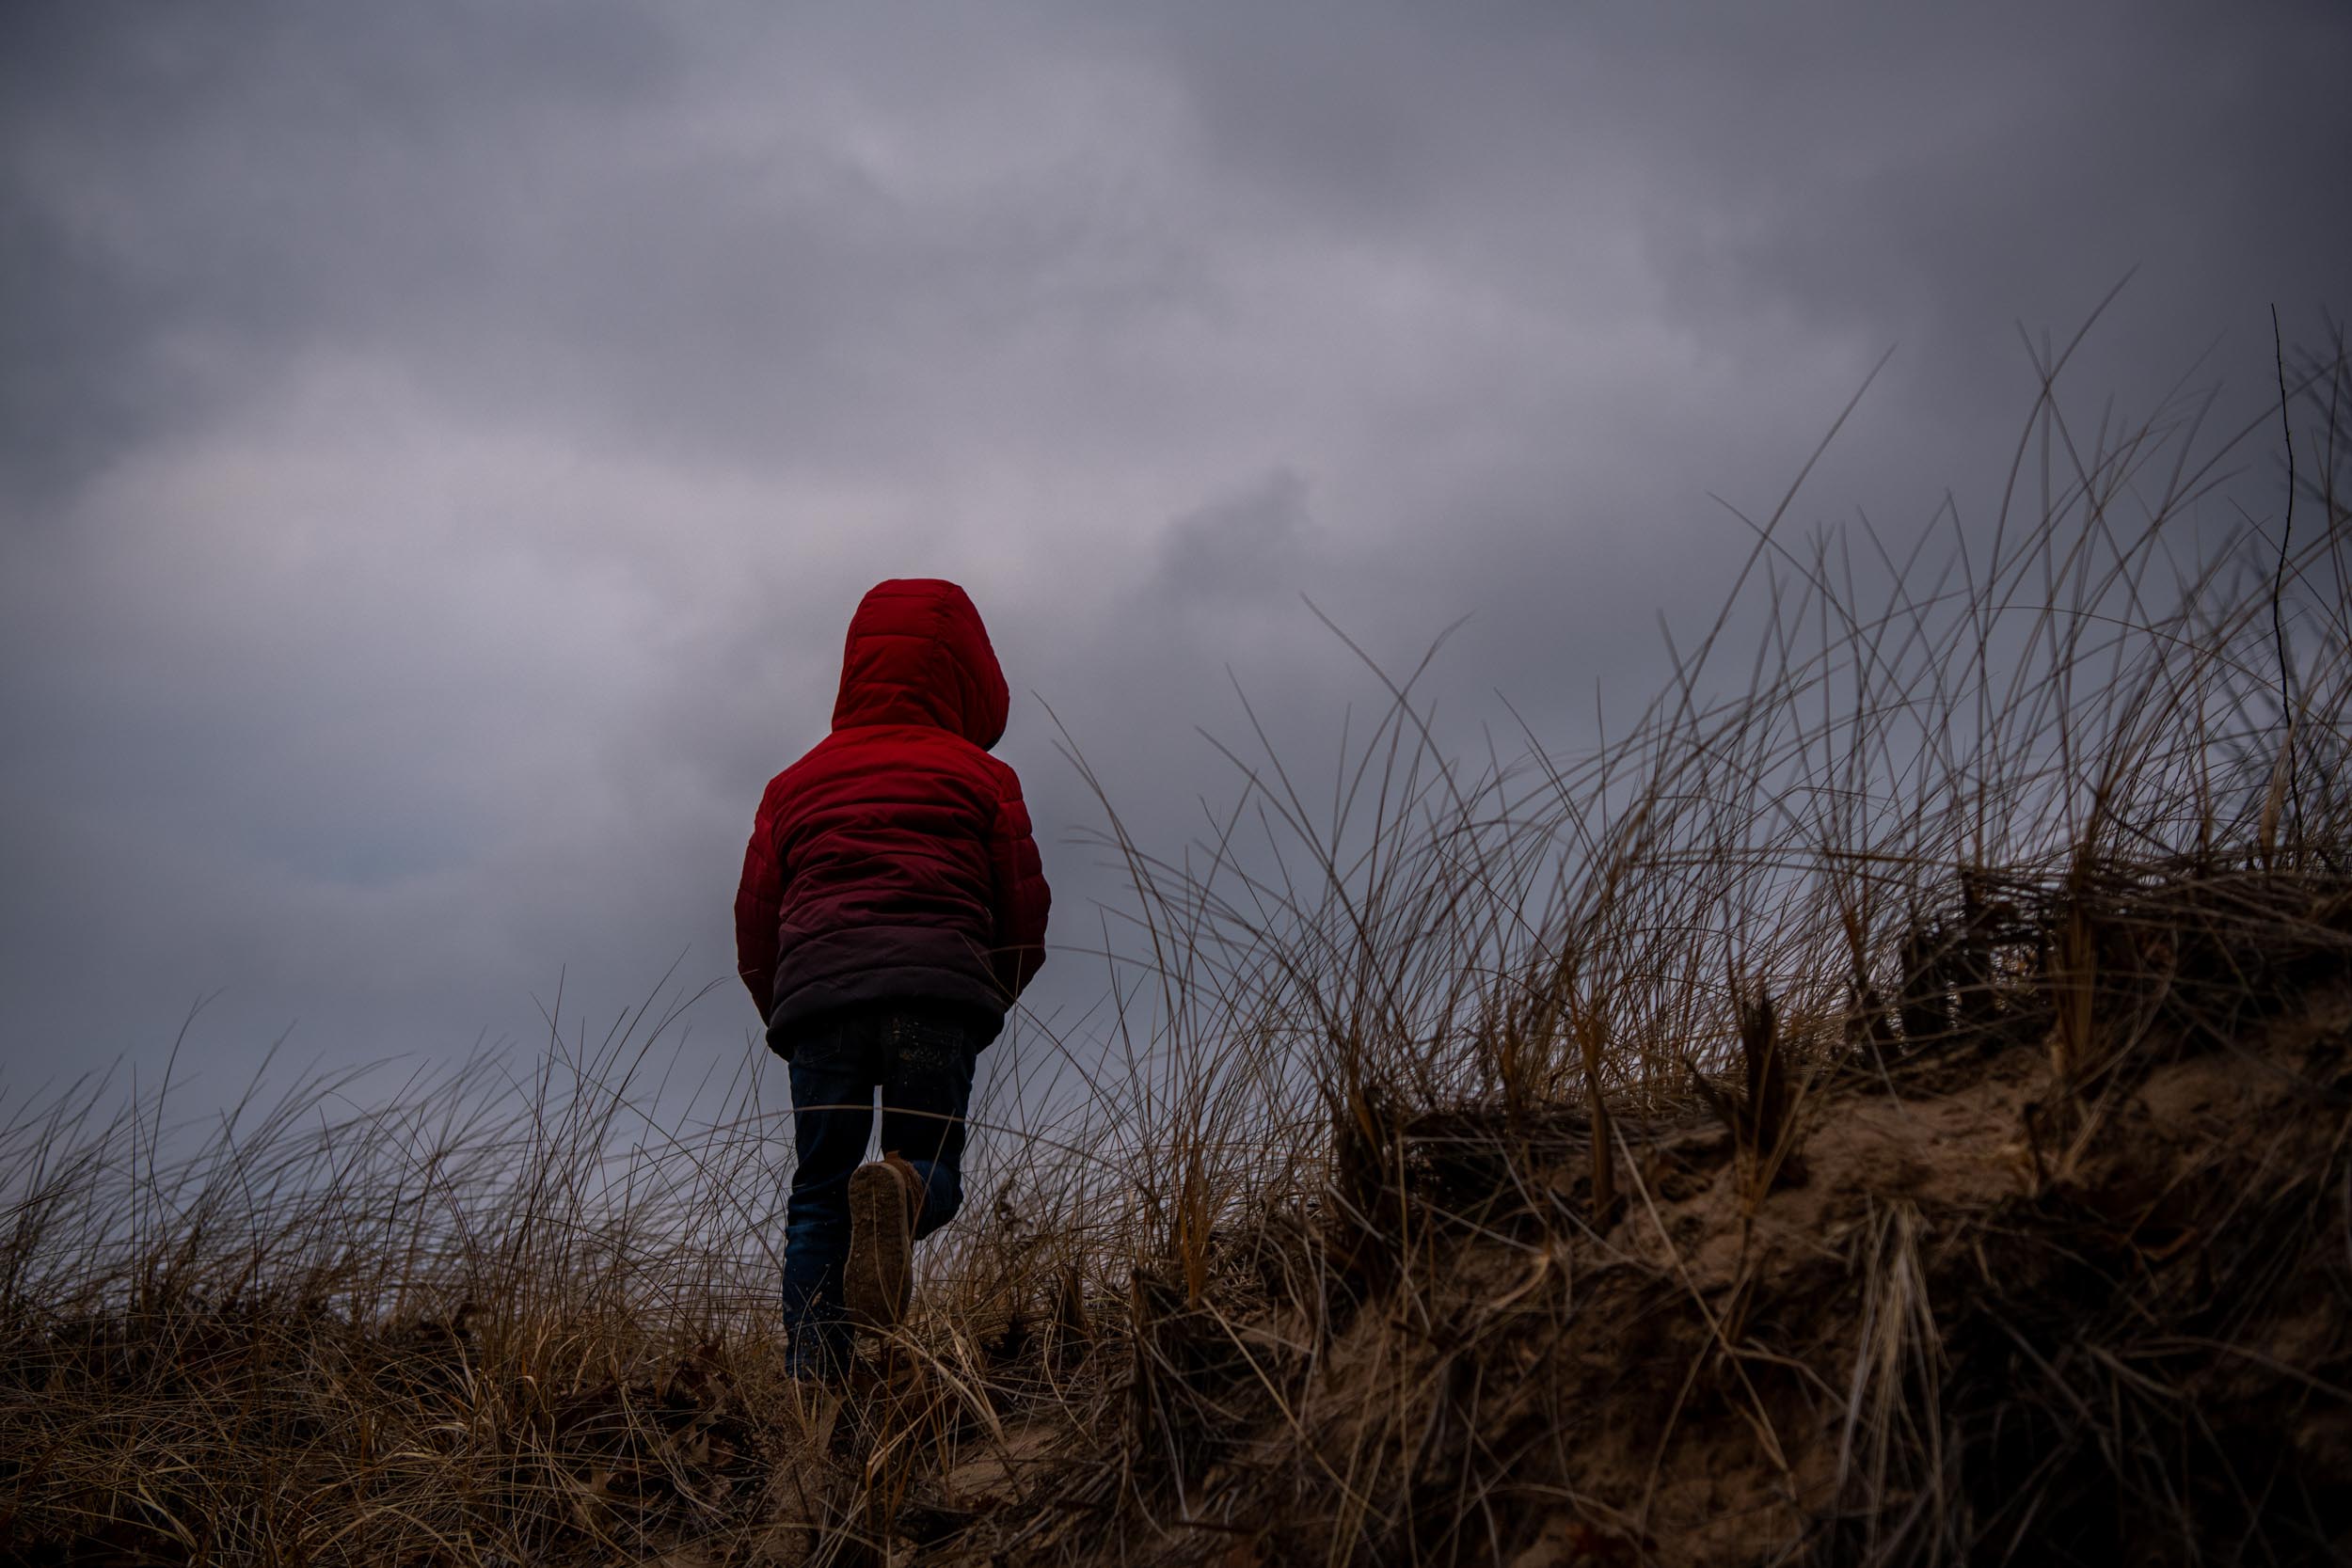 A boy hikes up a grassy dune wearing a red coat under cloudy skies in Michigan.